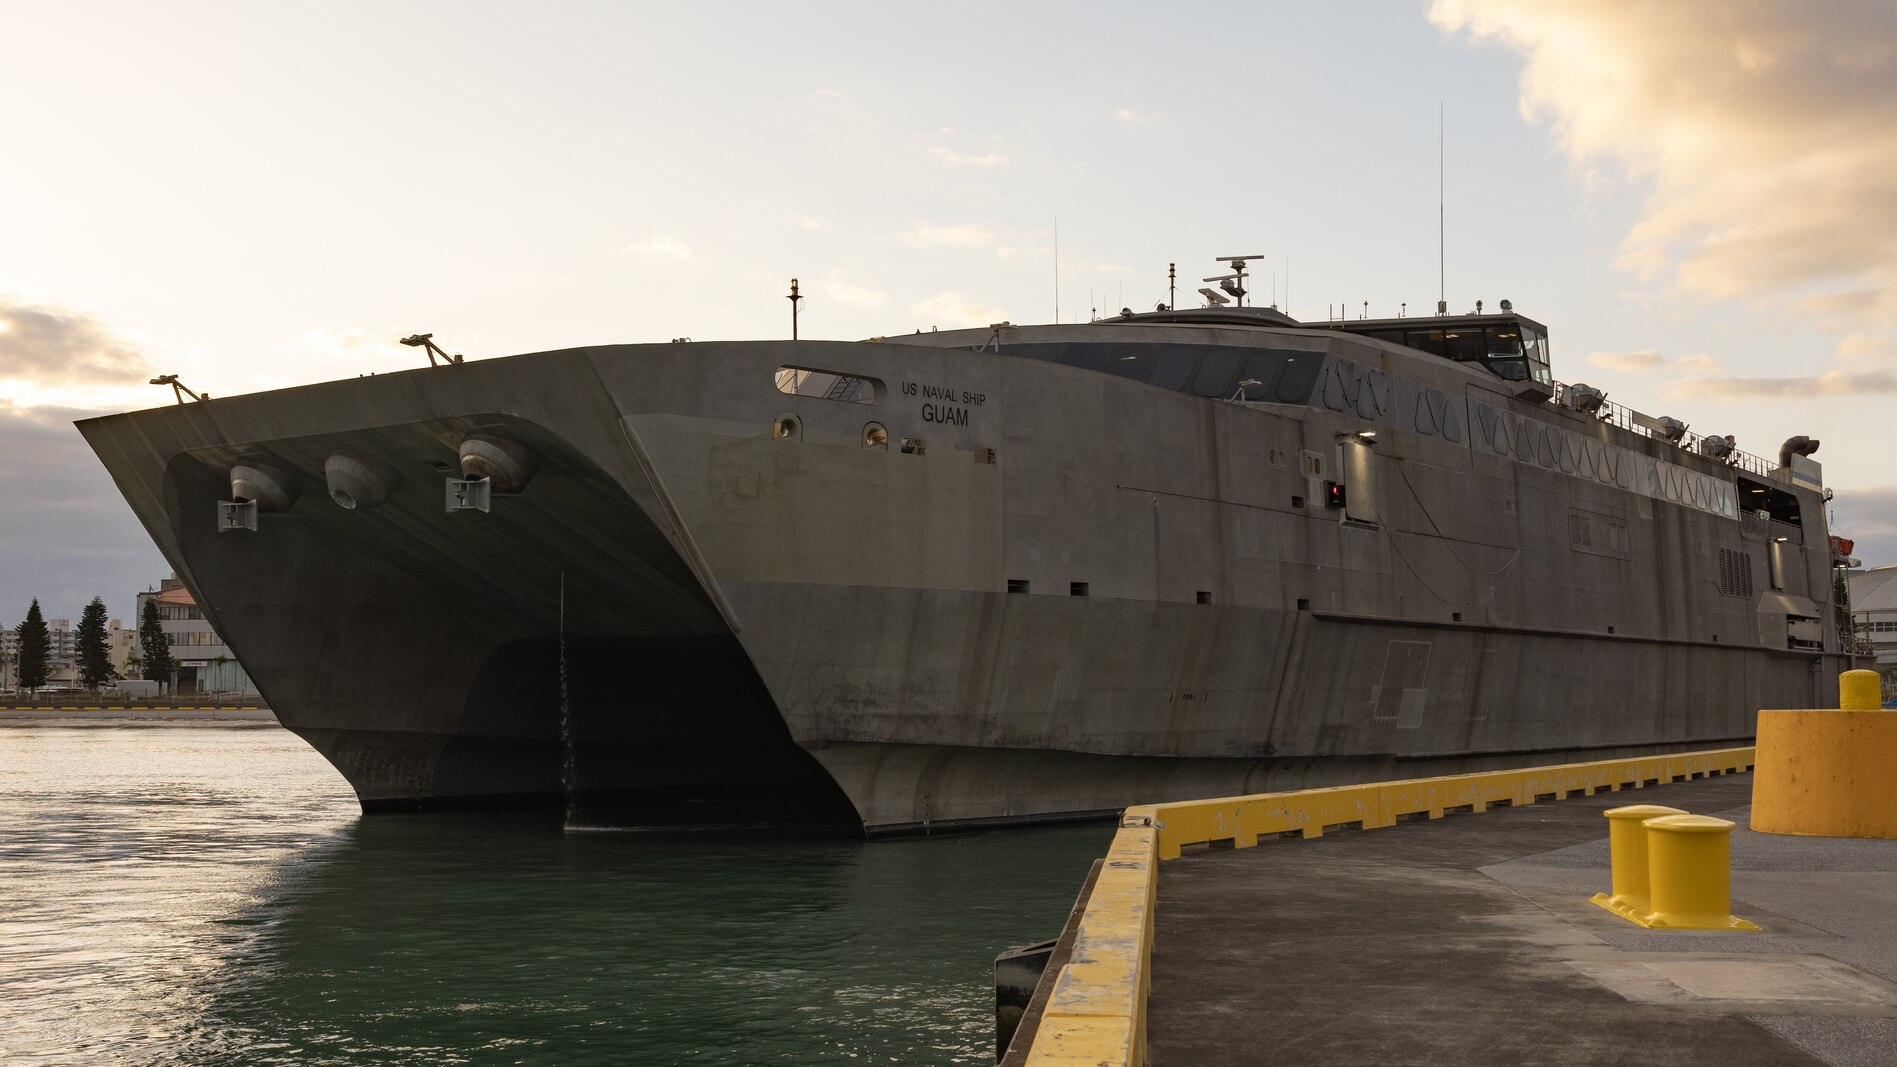 The high-speed transport vessel USNS Guam (T-HST 1) departs Naha Military Port, Okinawa, Japan, March 3, 2023. The USNS Guam will transport the Marines to the Republic of Korea for exercise Freedom Shield 23. Freedom Shield is a defense-oriented exercise designed to strengthen the ROK-U.S. Alliance, enhance our combined defense posture, and strengthen security and stability on the Korean peninsula. (U.S. Marine Corps photo by Lance Cpl. Tyler Andrews)